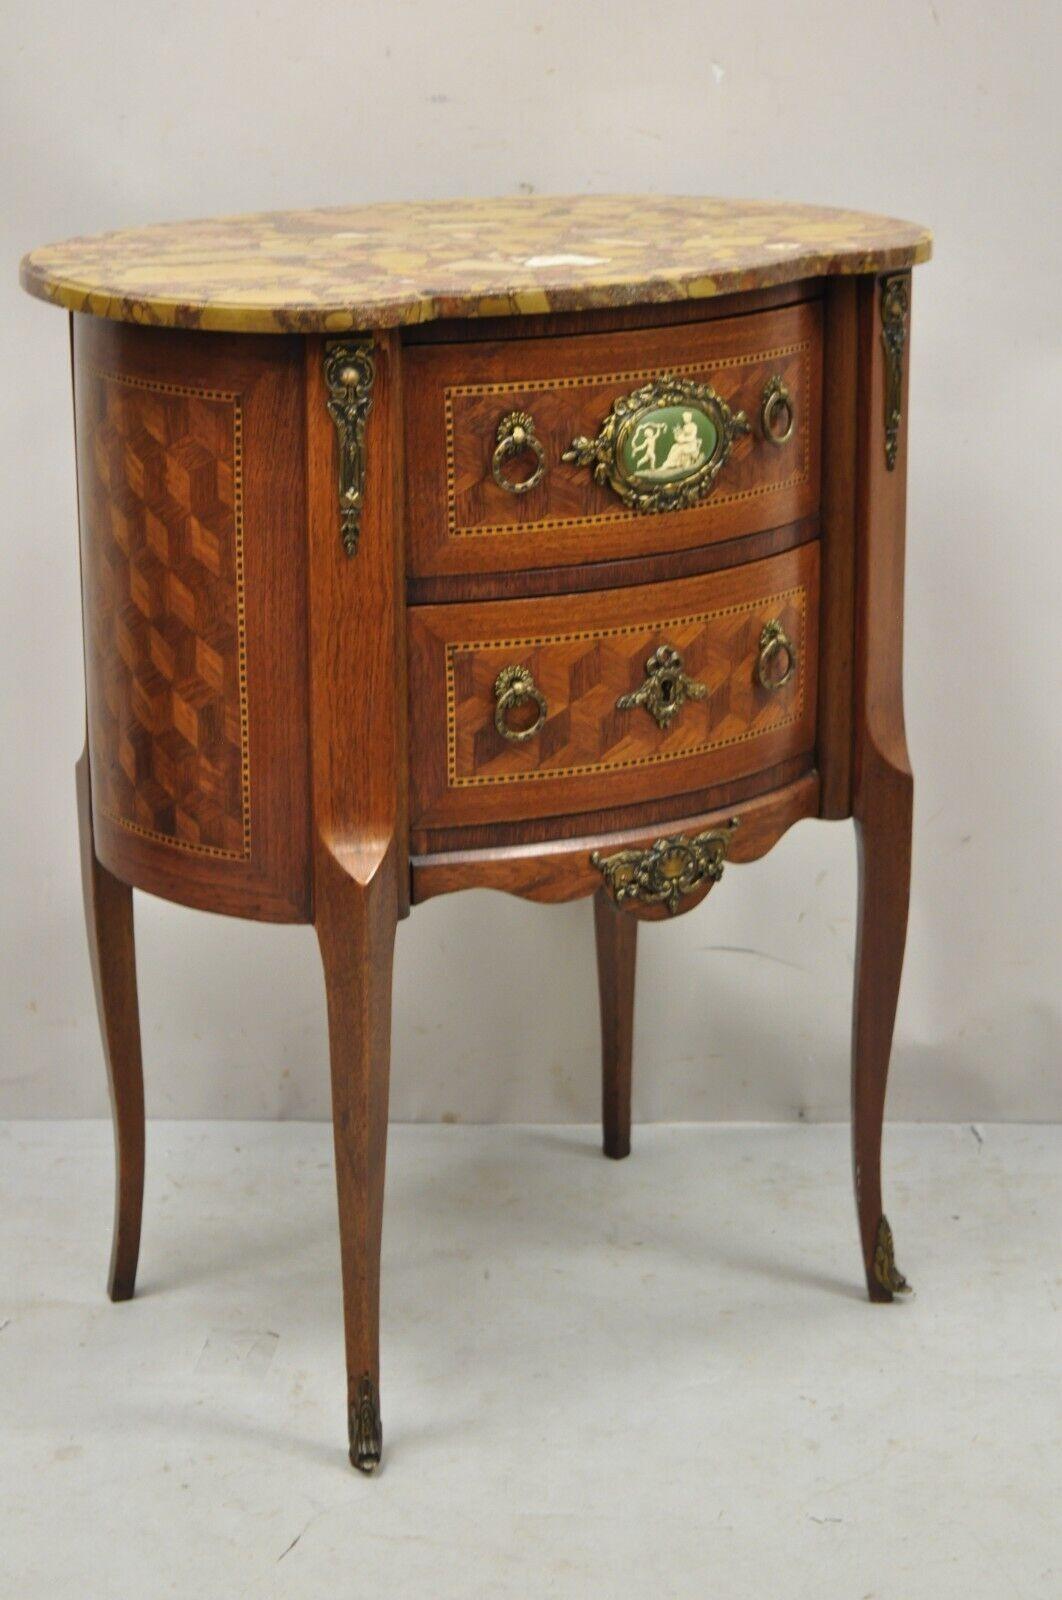 Antique French Louis XV Style Rouge Marble Top Bombe Commode Nightstand Side Table. Item features a rouge marble top, green jasperware medallion to drawer, bronze ormolu, satinwood marquetery inlay. Circa Early 1900s. Measurements: 29